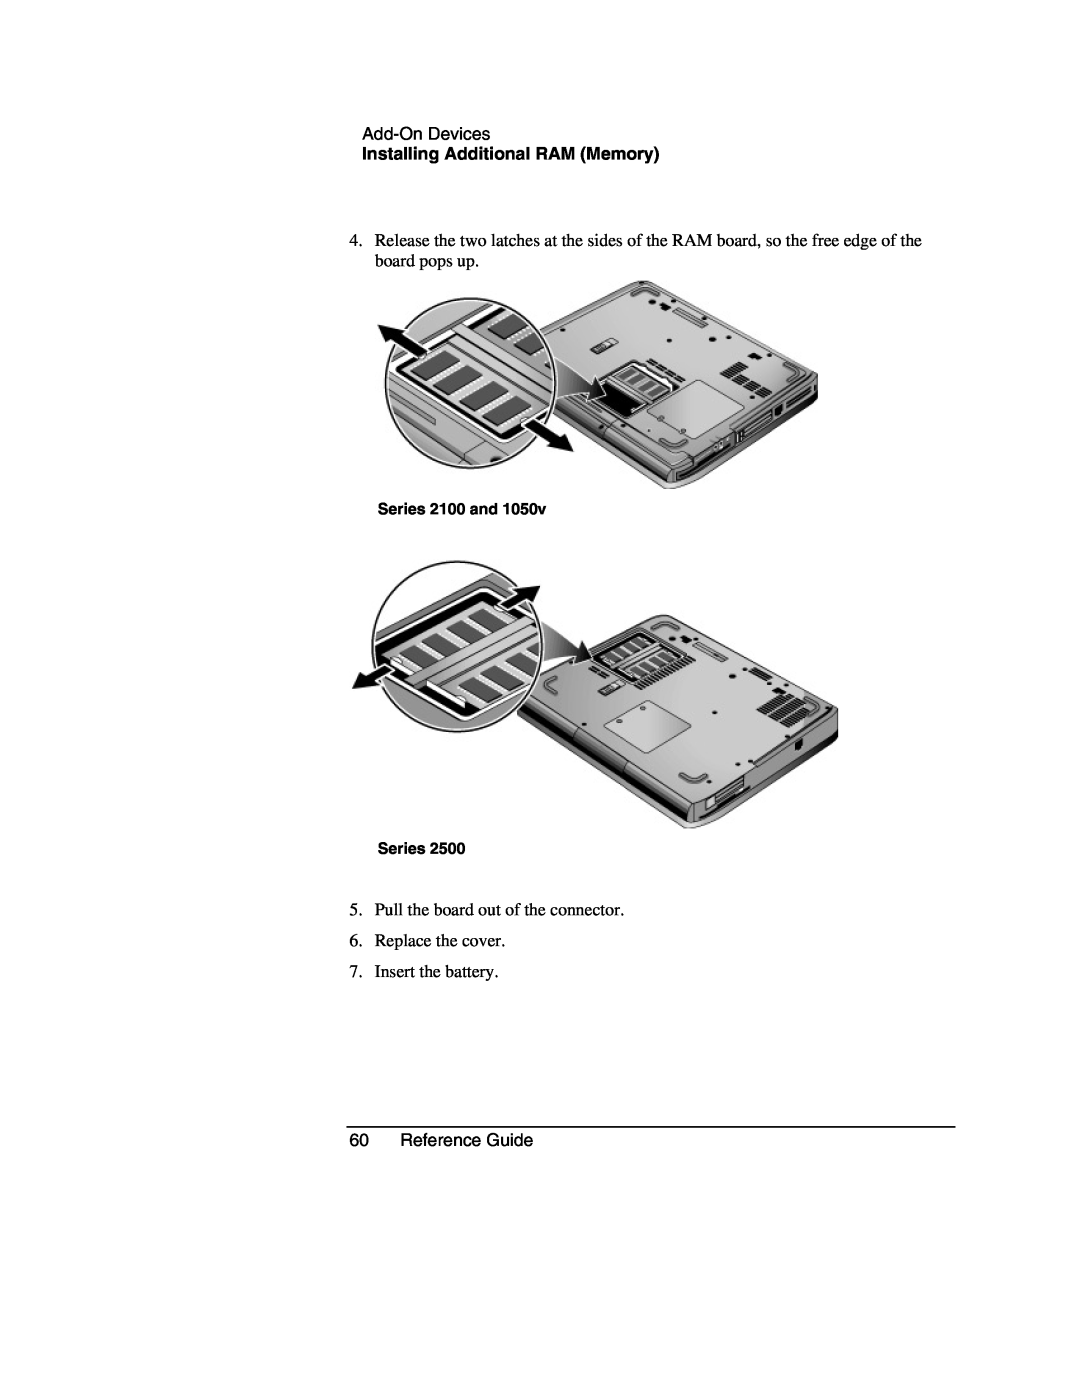 HP 2168EA Reference Guide, Add-On Devices, Installing Additional RAM Memory, Insert the battery, Series 2100 and Series 